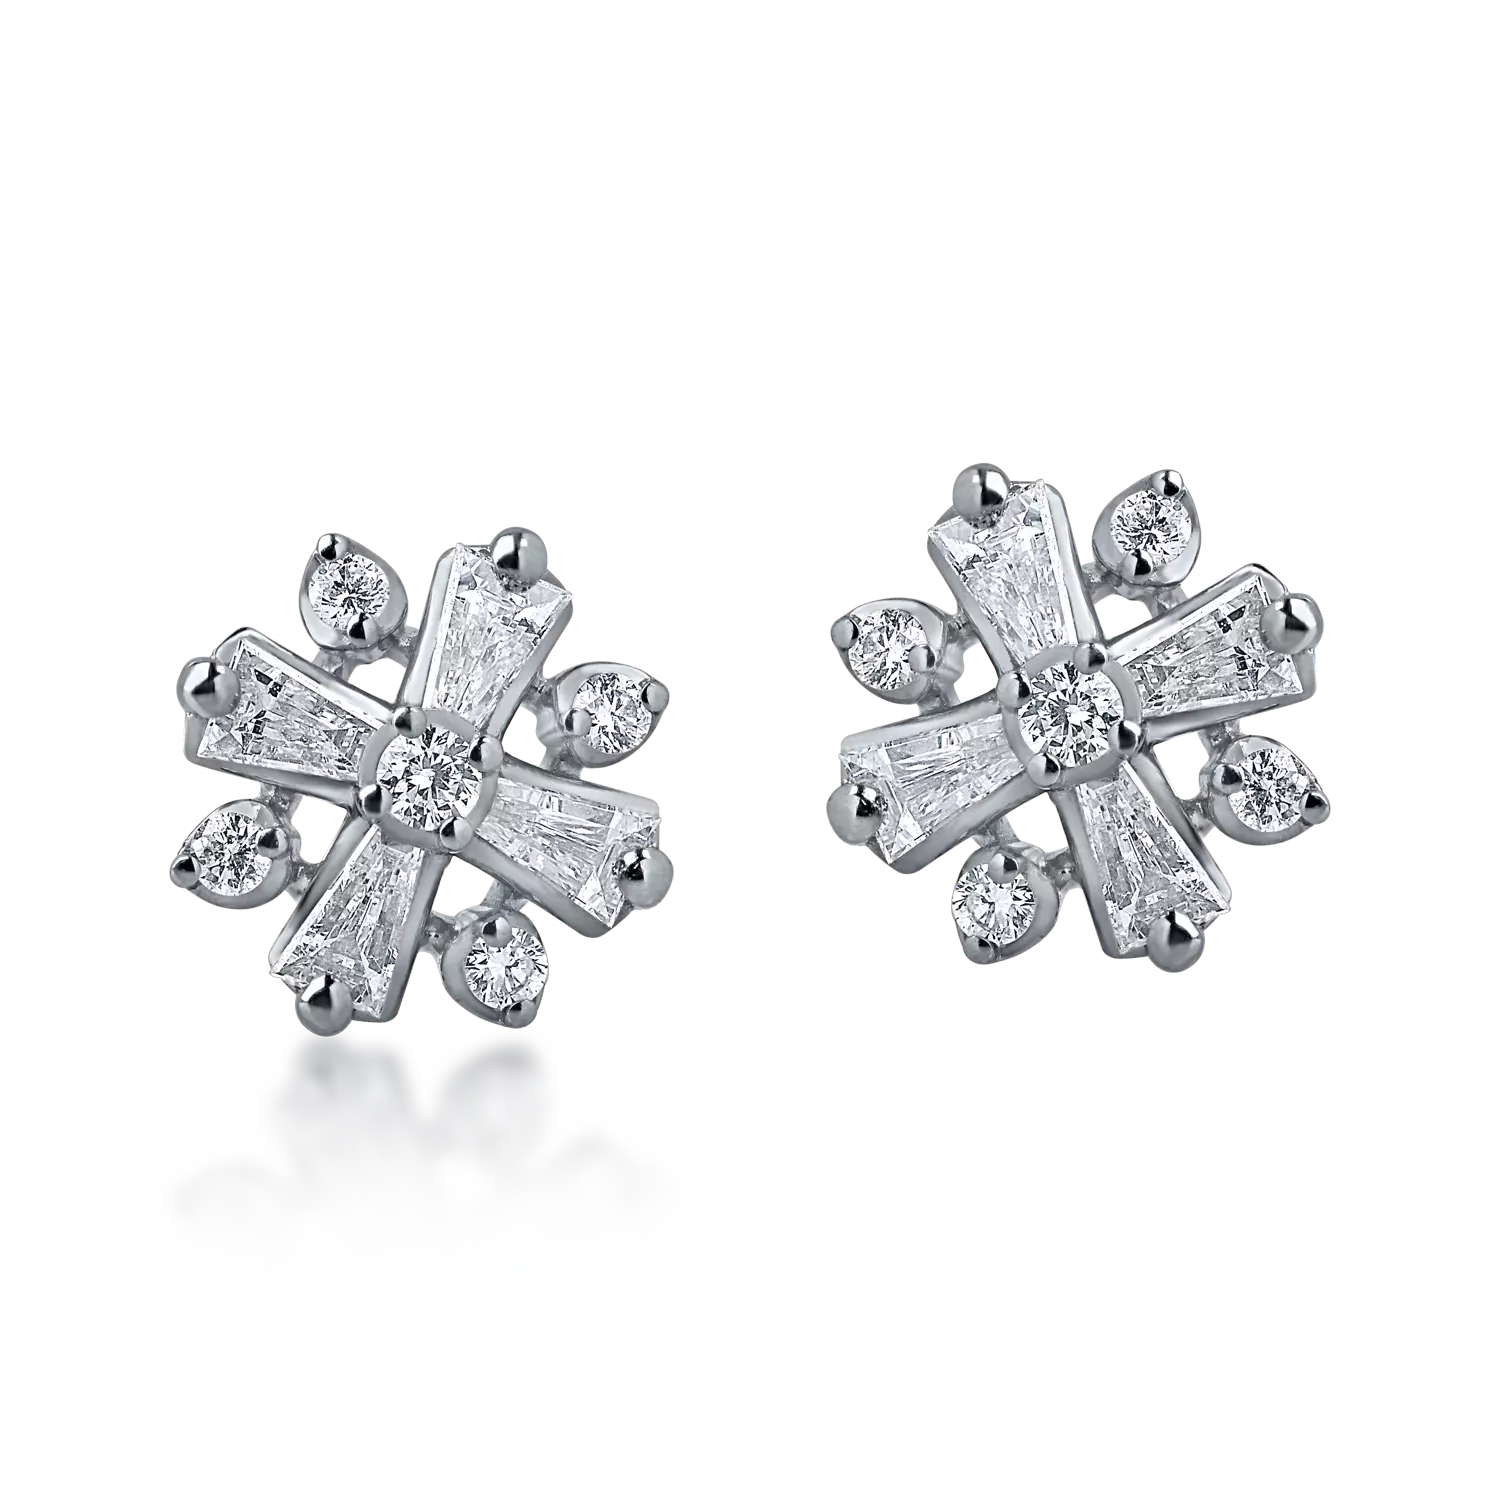 White gold screw back earrings with 0.33ct diamonds